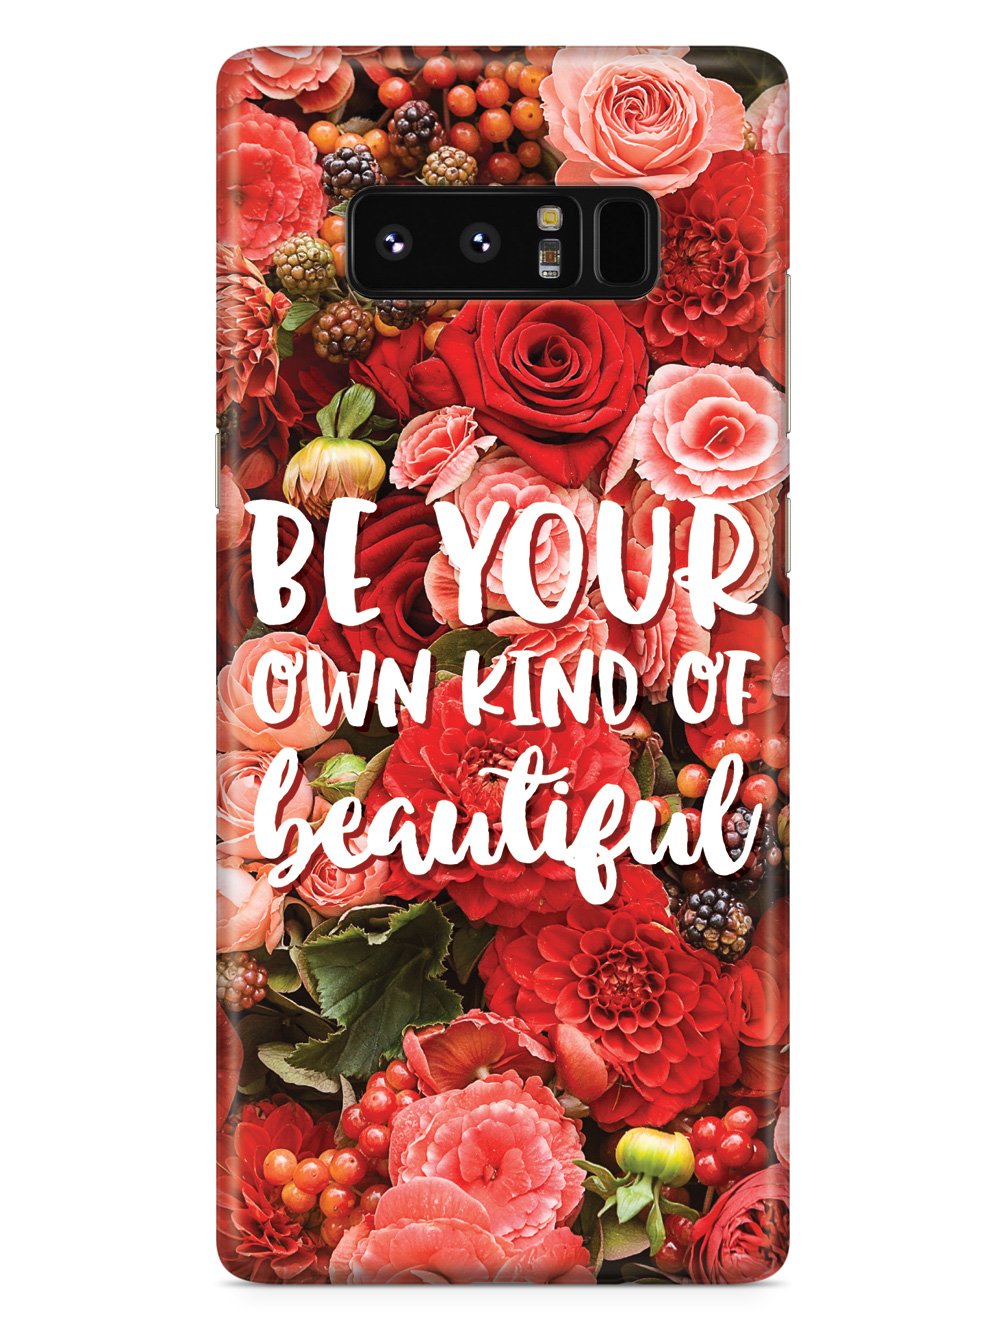 Be Your Own Kind of Beautiful - Red Flower Background Case - pipercleo.com